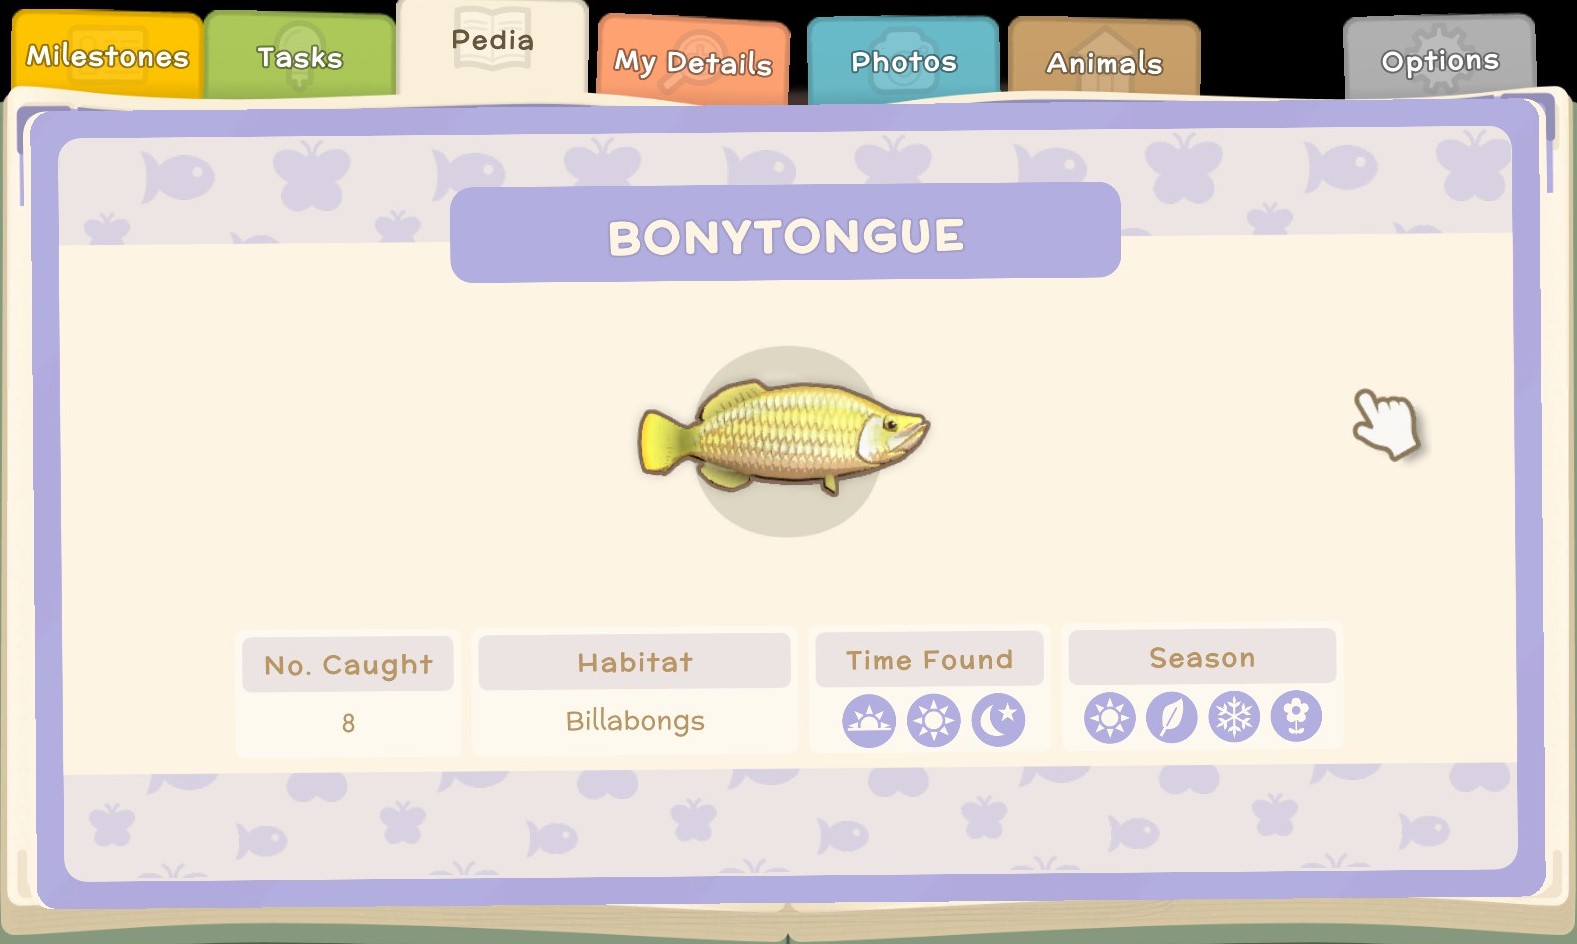 Dinkum - List of all the fish in the game - Pedia Fish - 0F77FB4